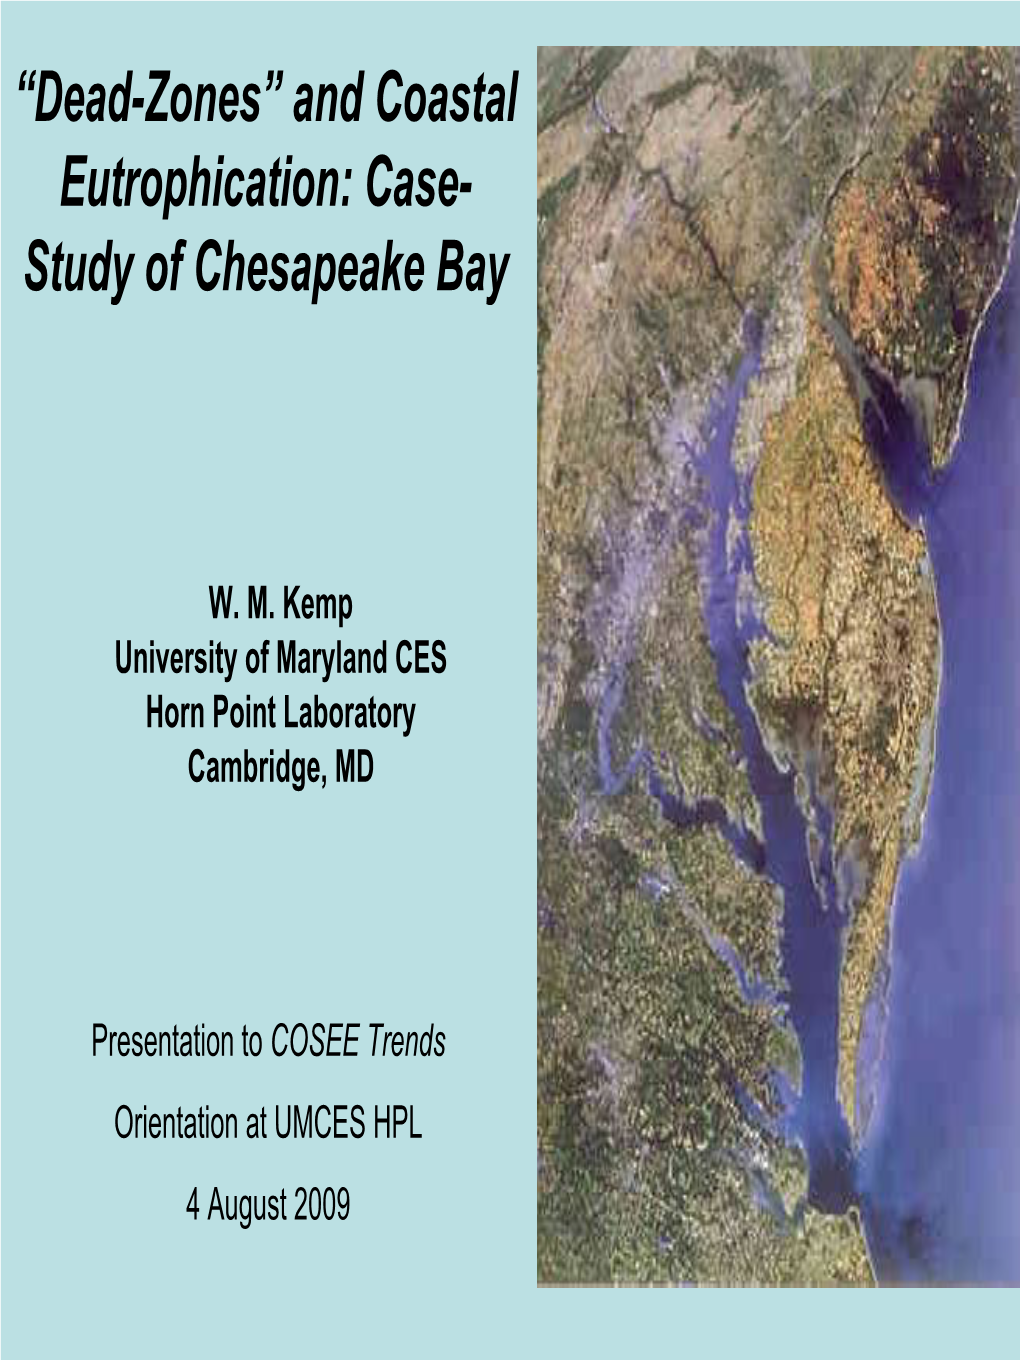 “Dead-Zones” and Coastal Eutrophication: Case- Study of Chesapeake Bay